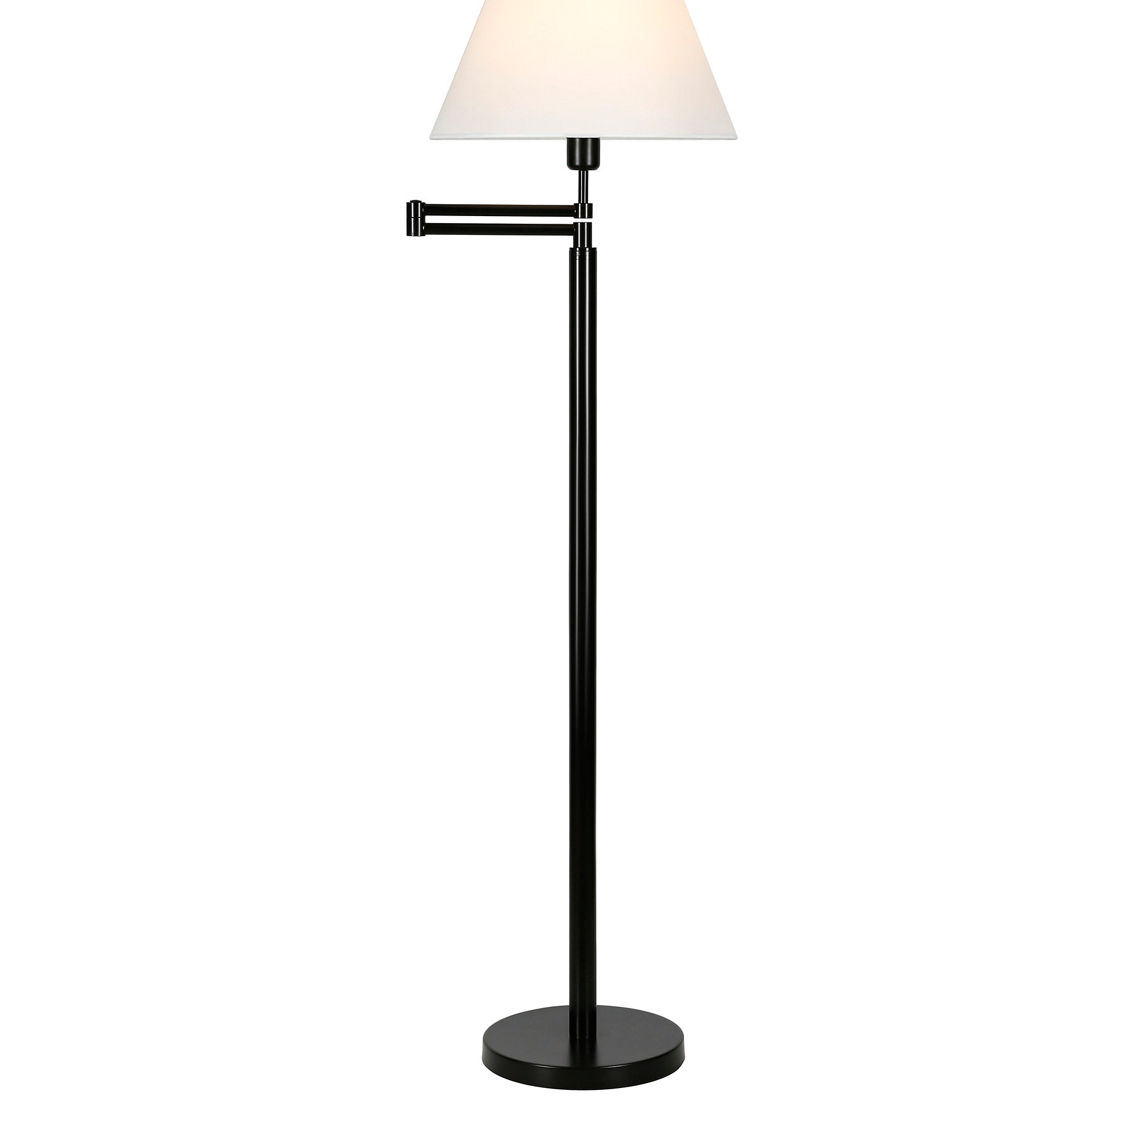 Hudson&Canal Moby Swing Arm Floor Lamp with Fabric Empire Shade - Image 3 of 5